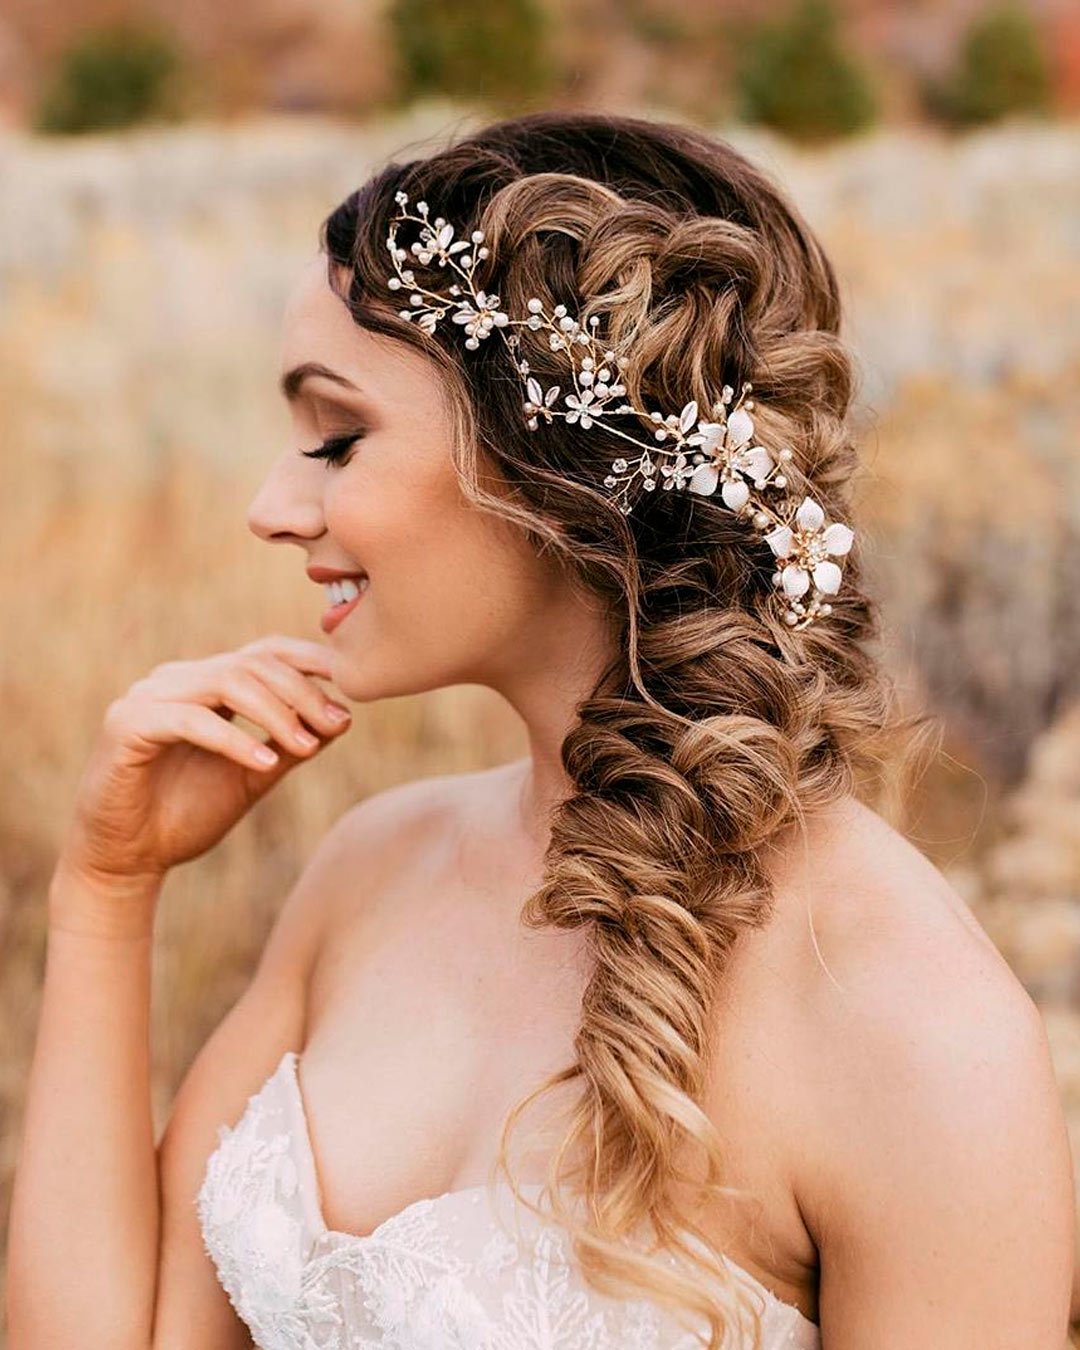 how to choose wedding hairstyle bride smile